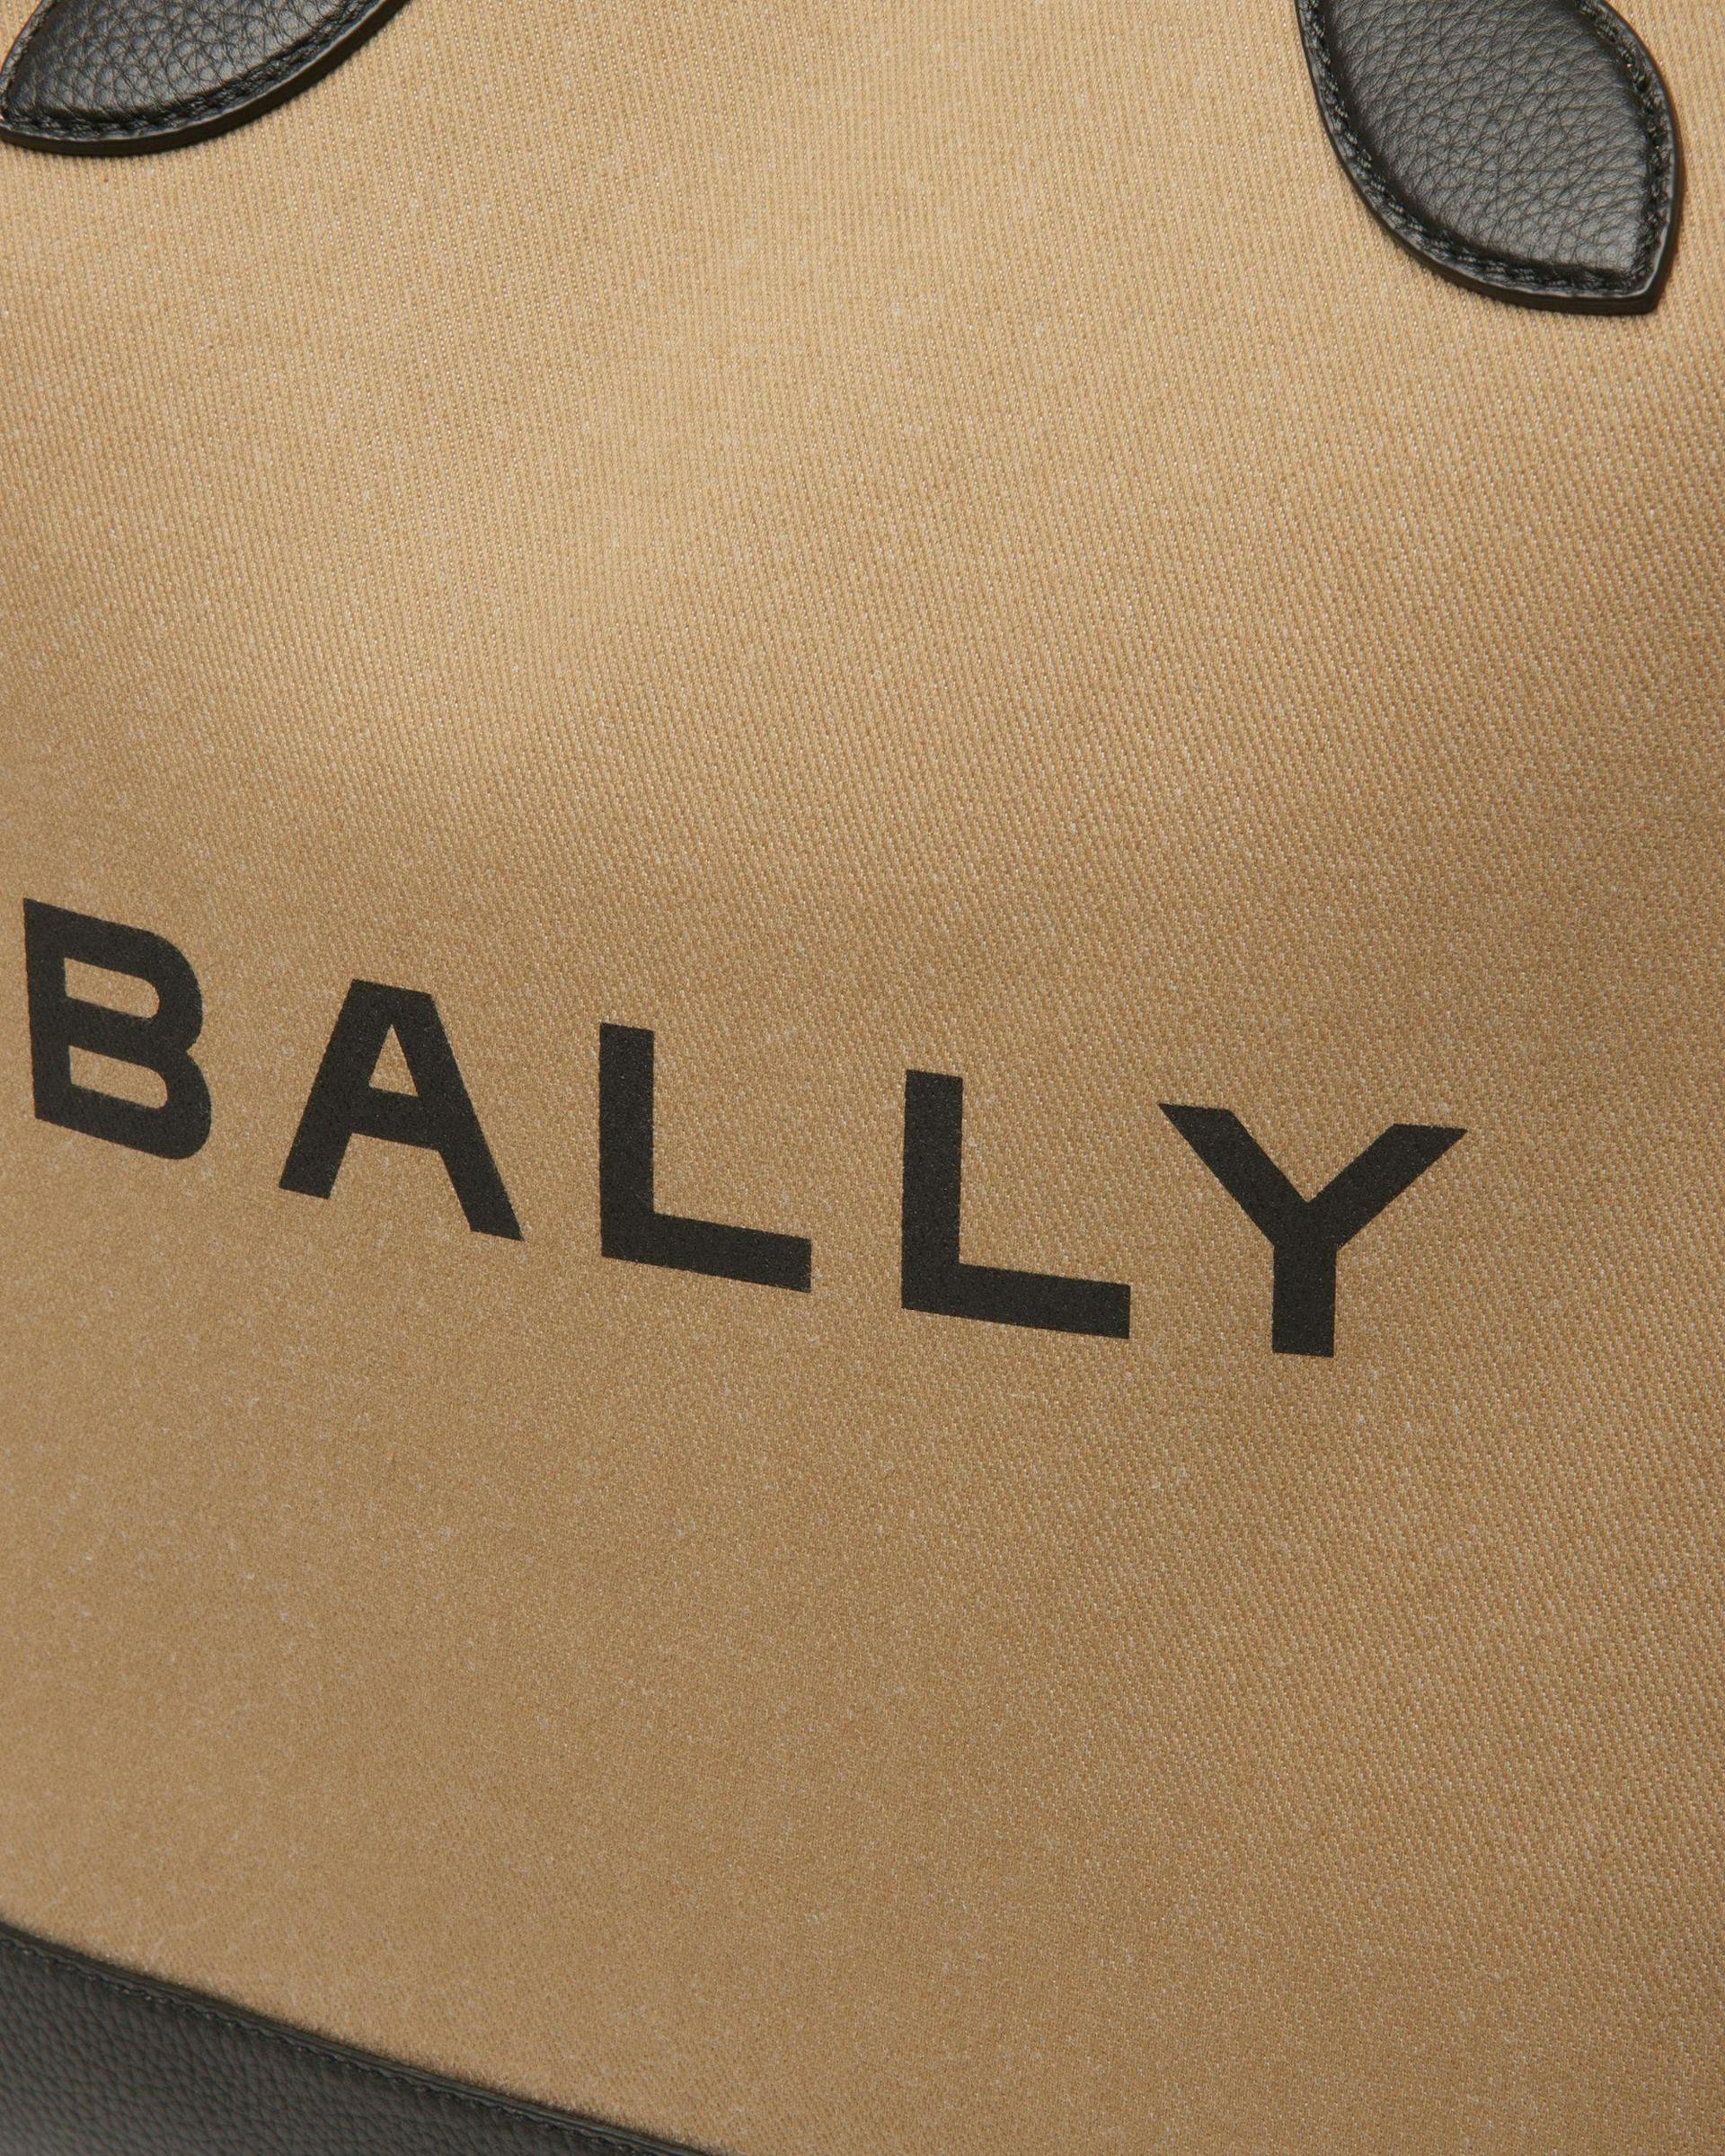 Bar Tote Bag In Sand And Black Fabric - Women's - Bally - 06